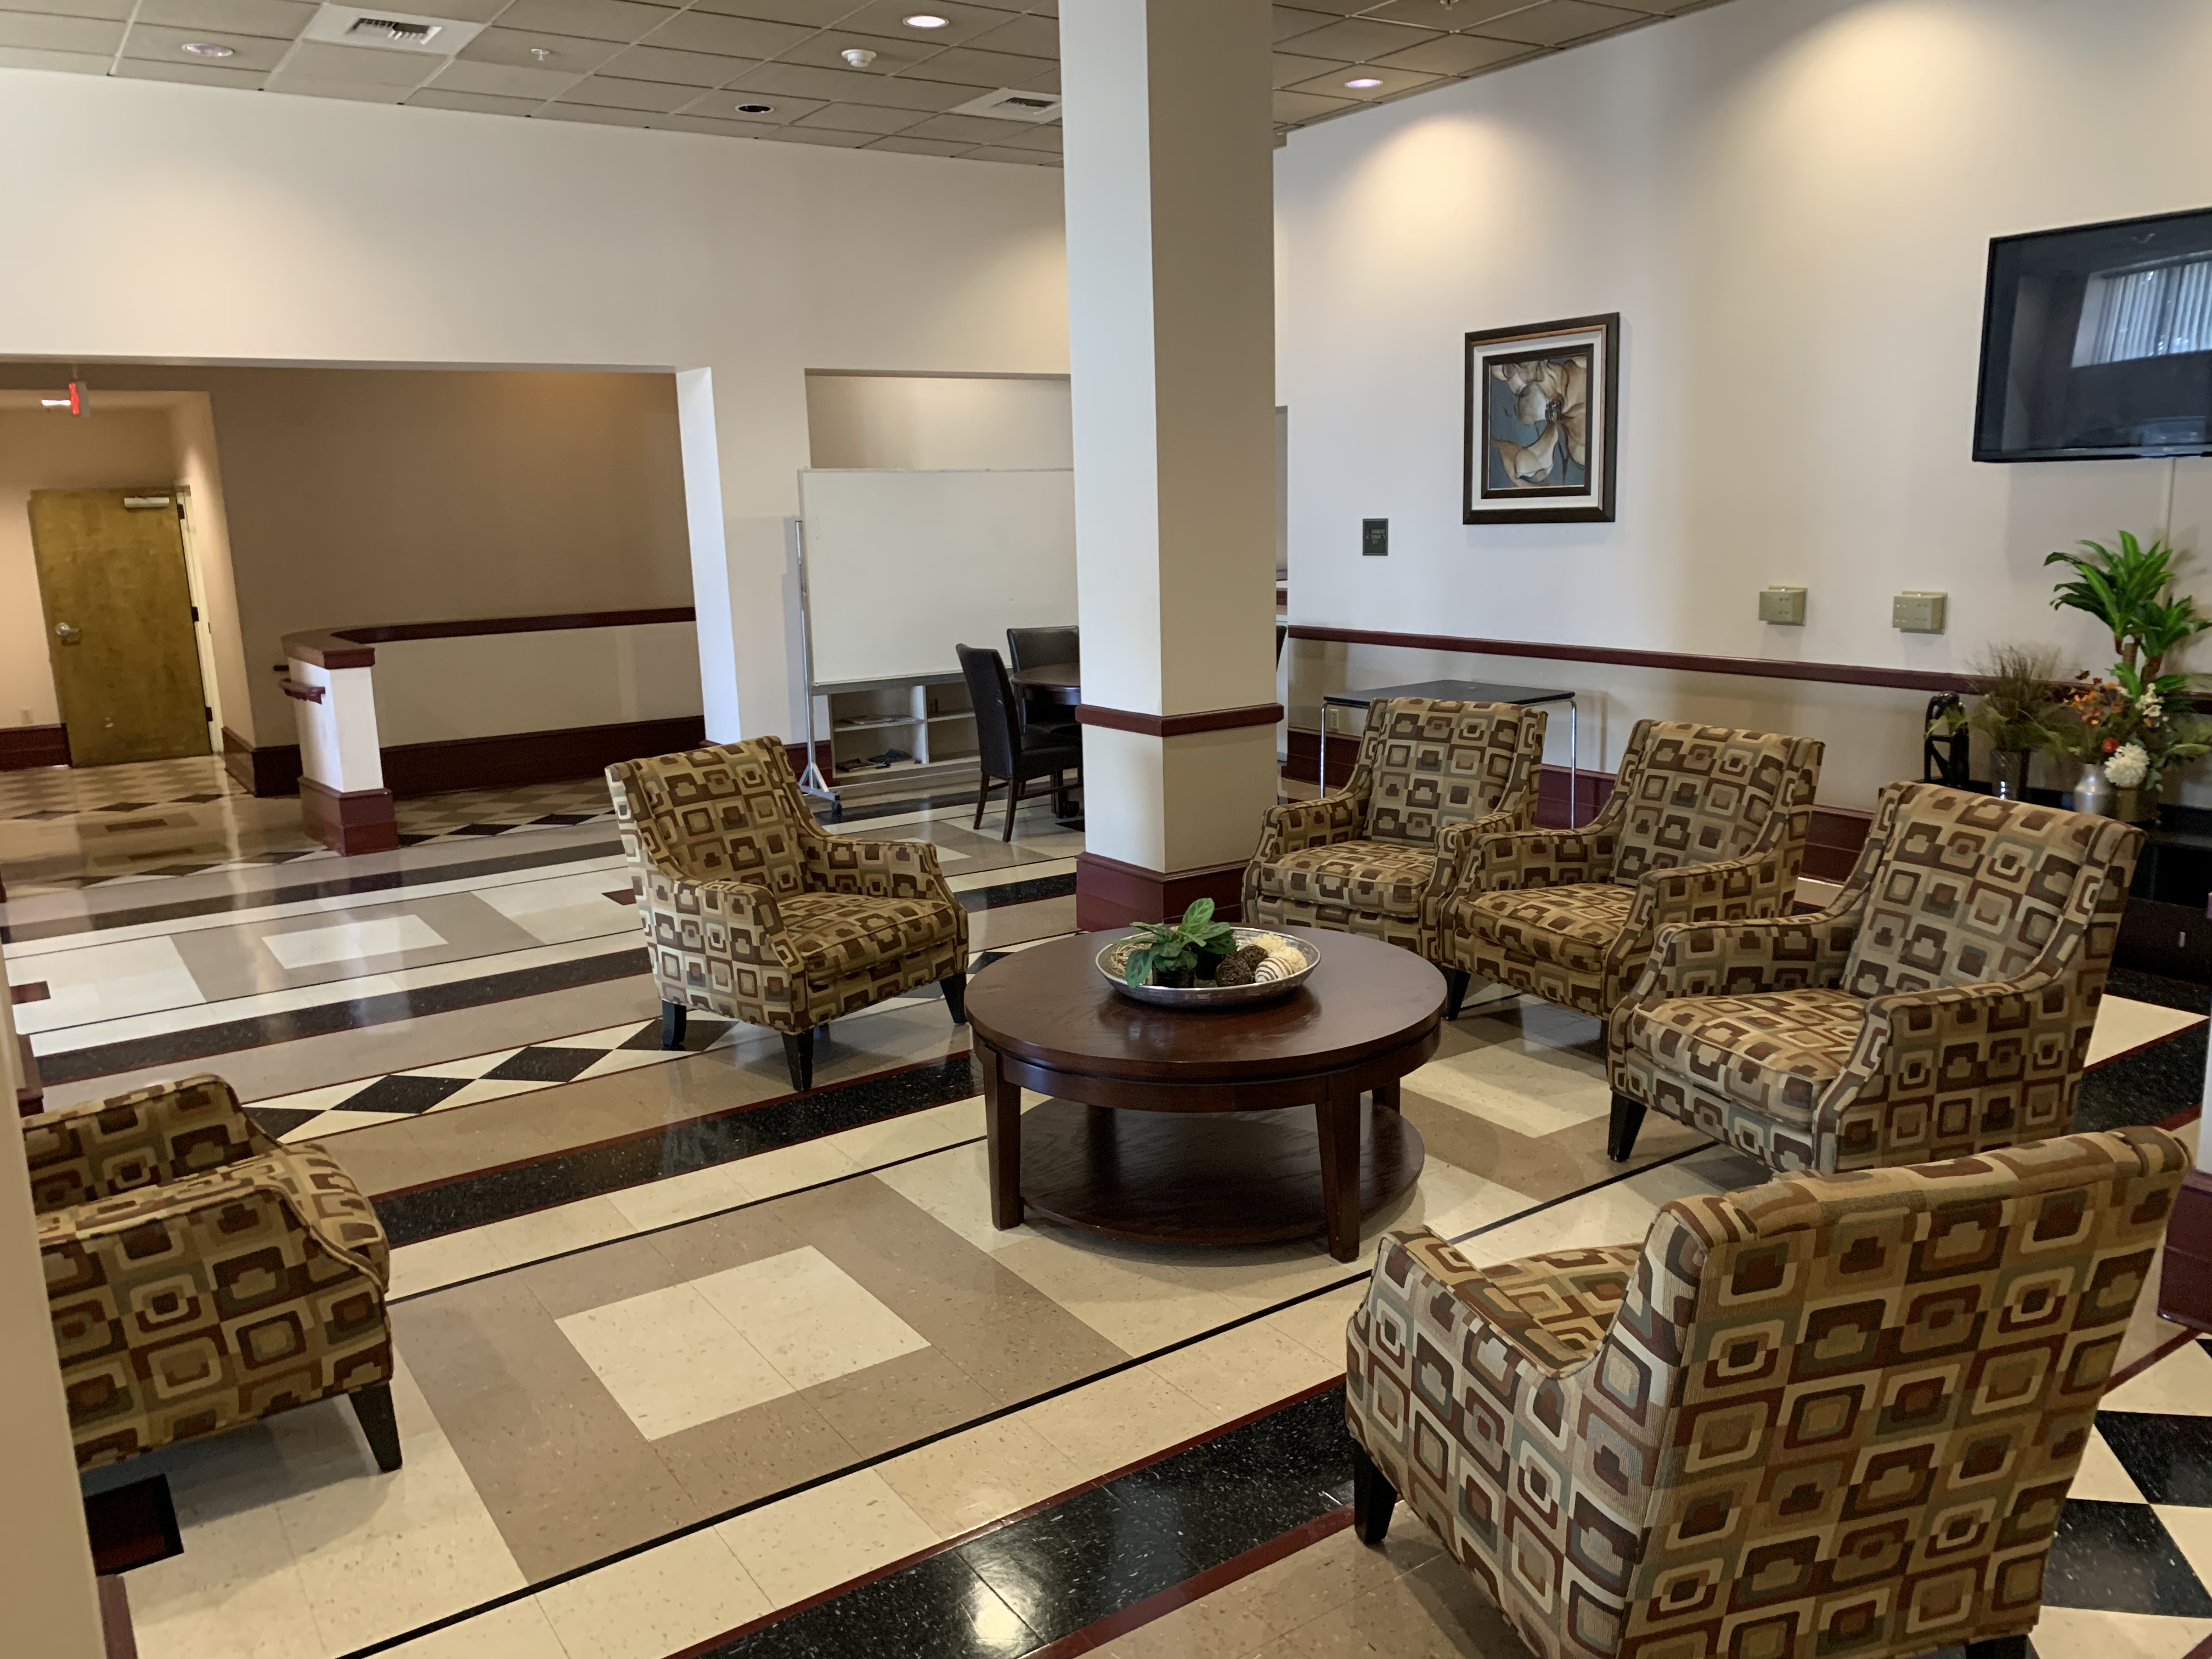 Image of the building lobby equipped with furniture